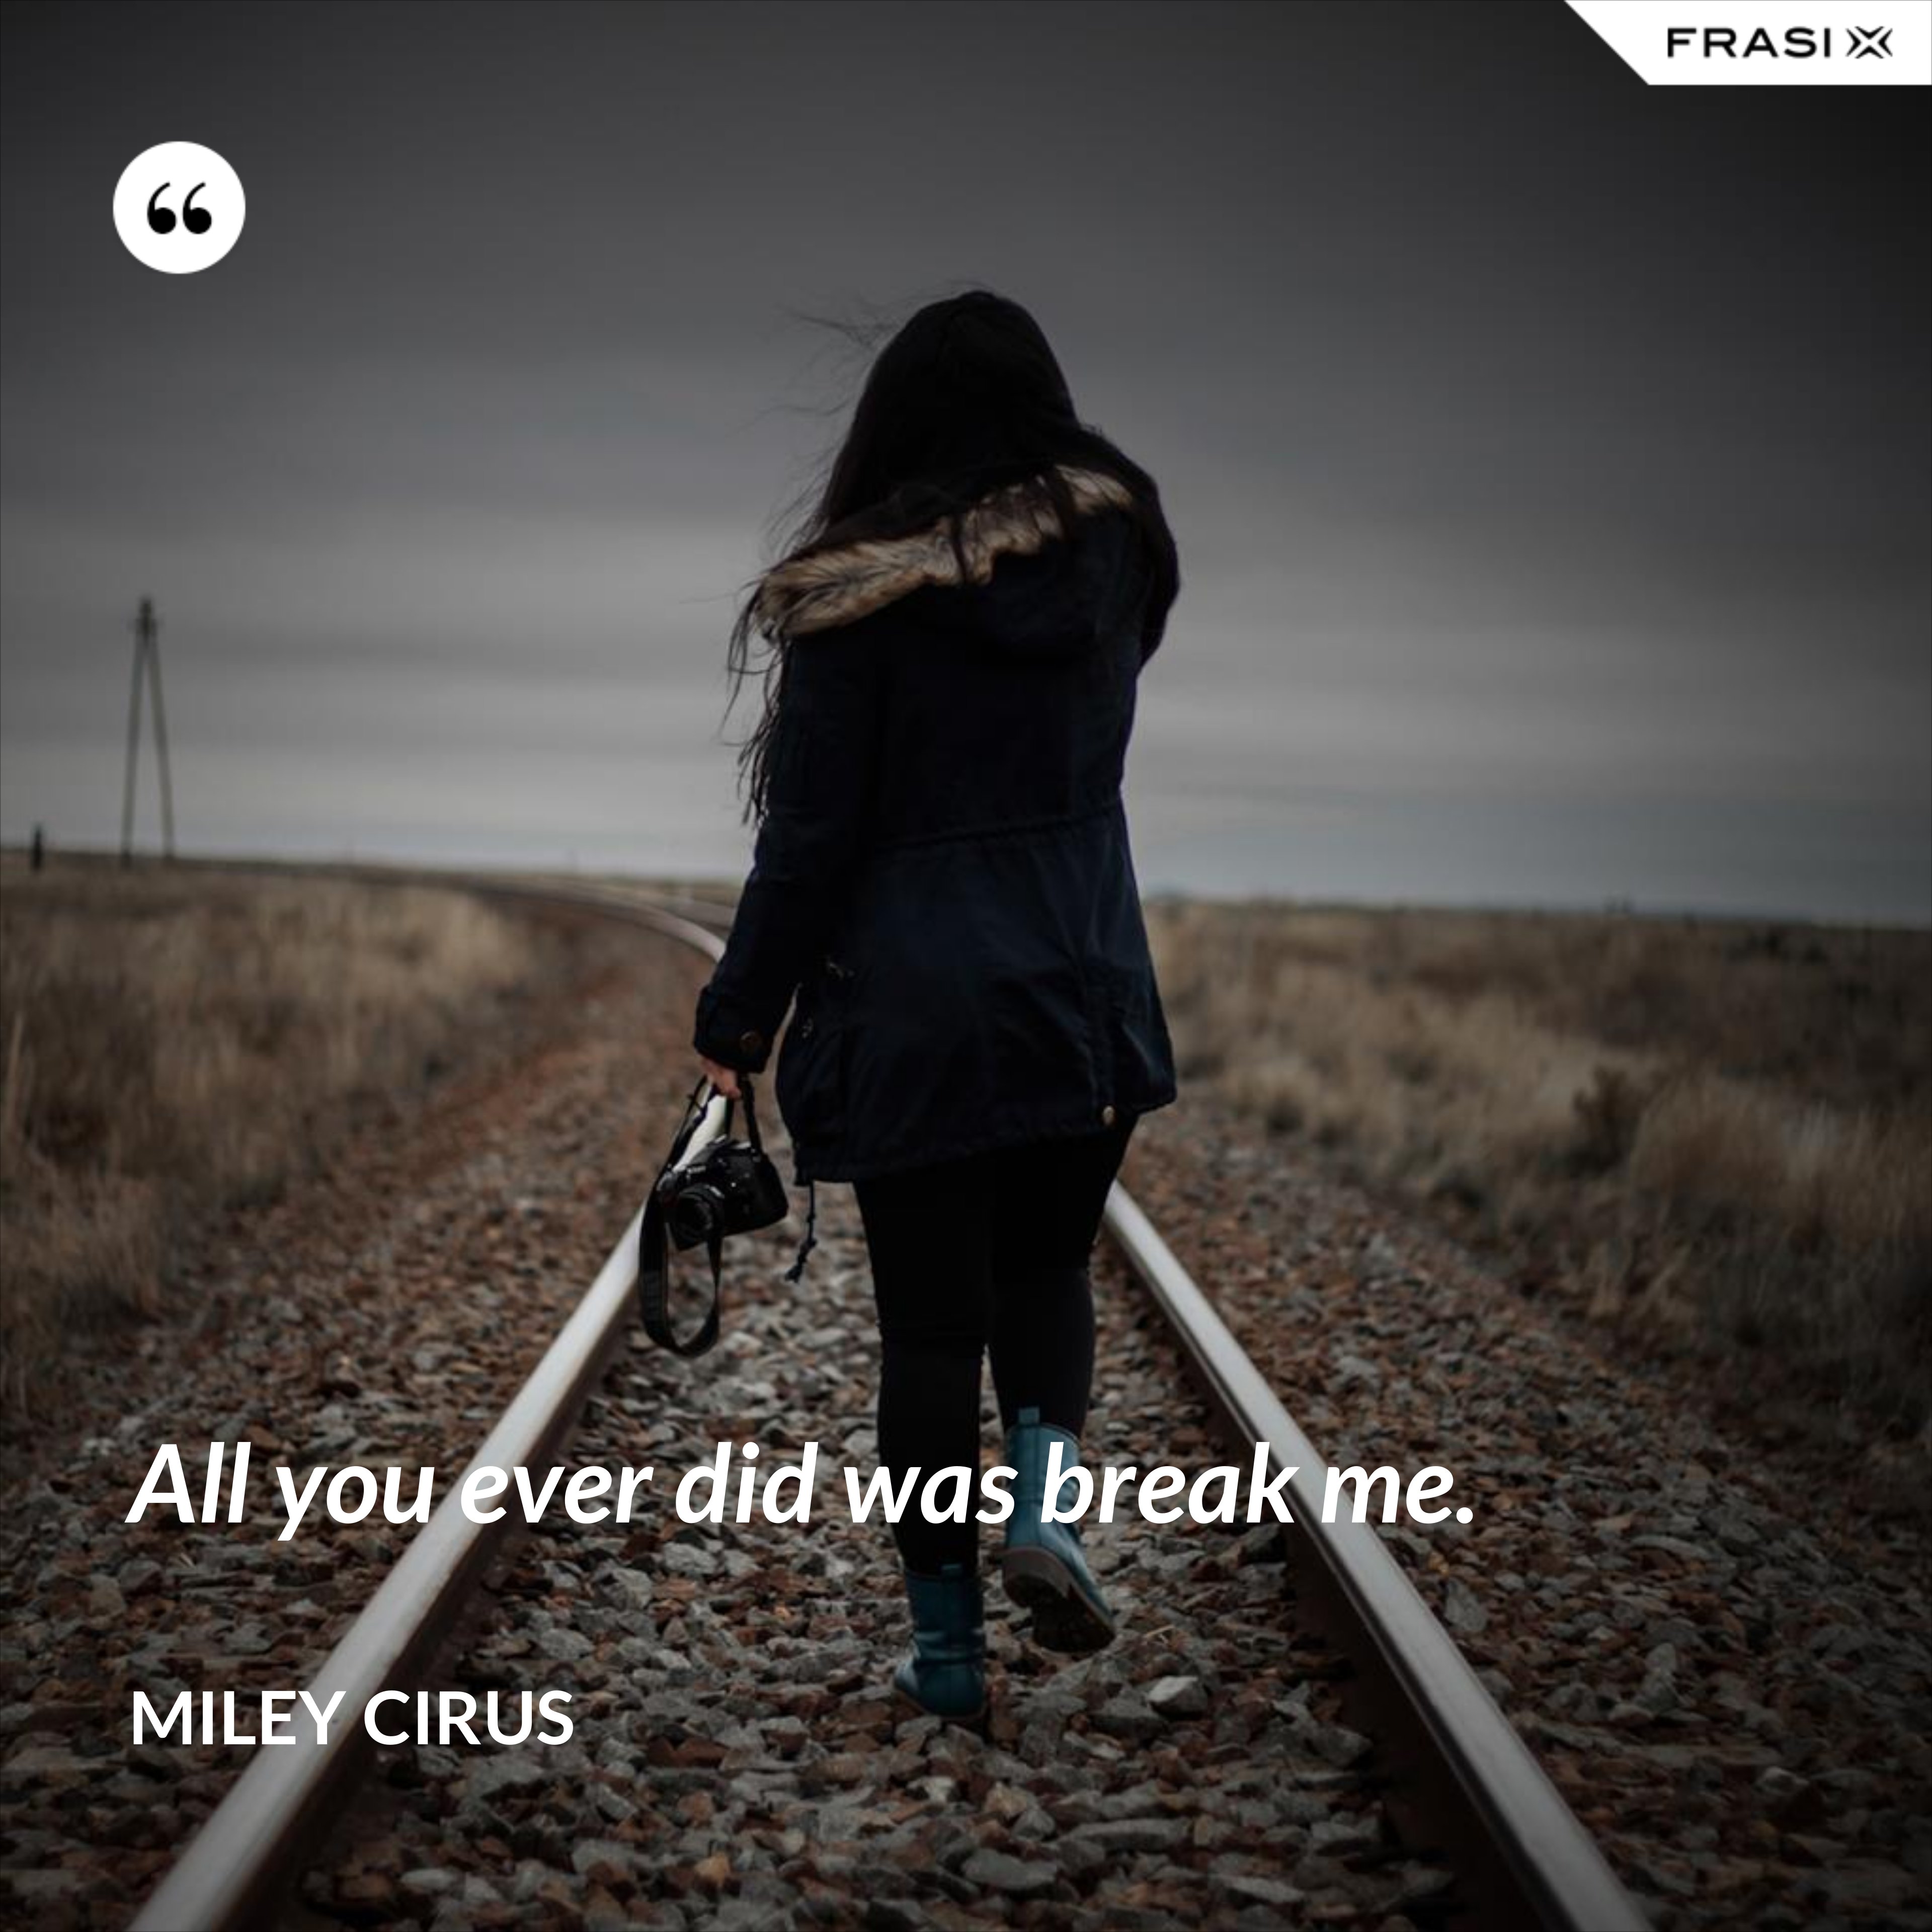 All you ever did was break me. - Miley Cirus